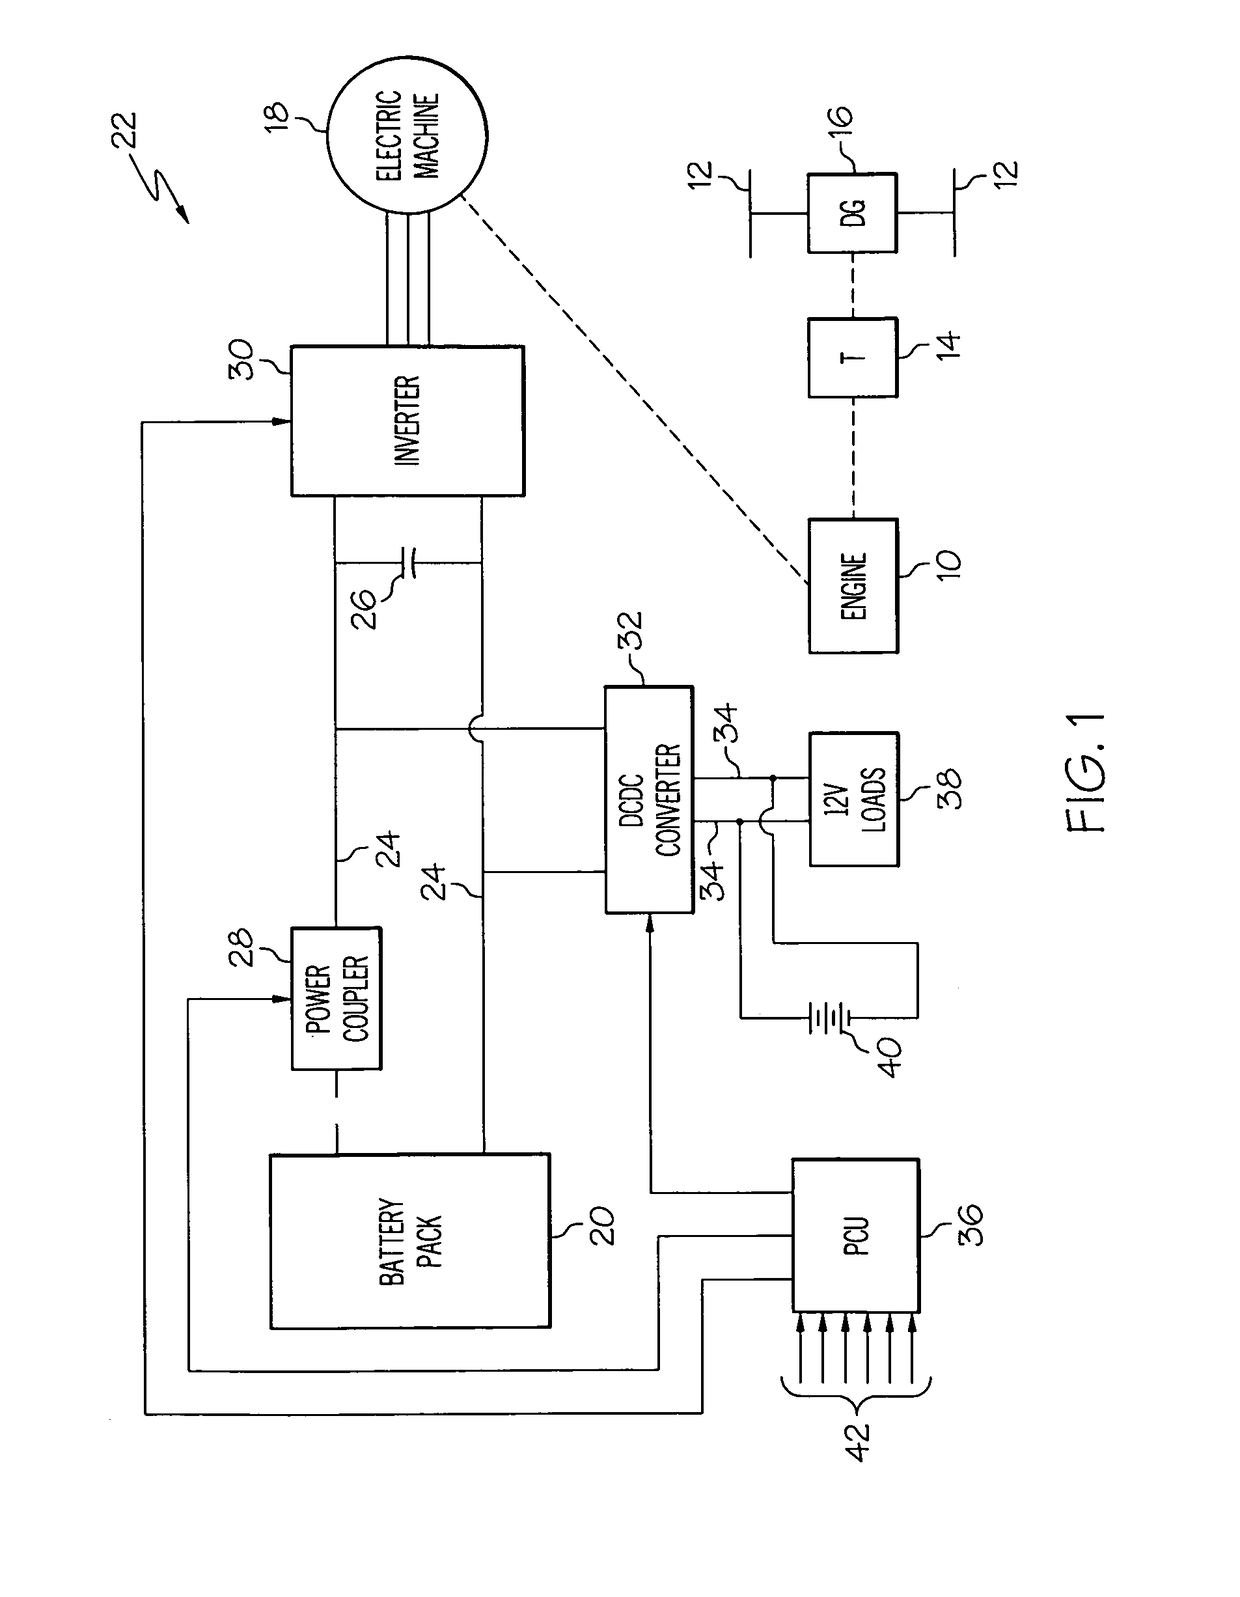 Fast response failure mode control methodology for a hybrid vehicle having an electric machine